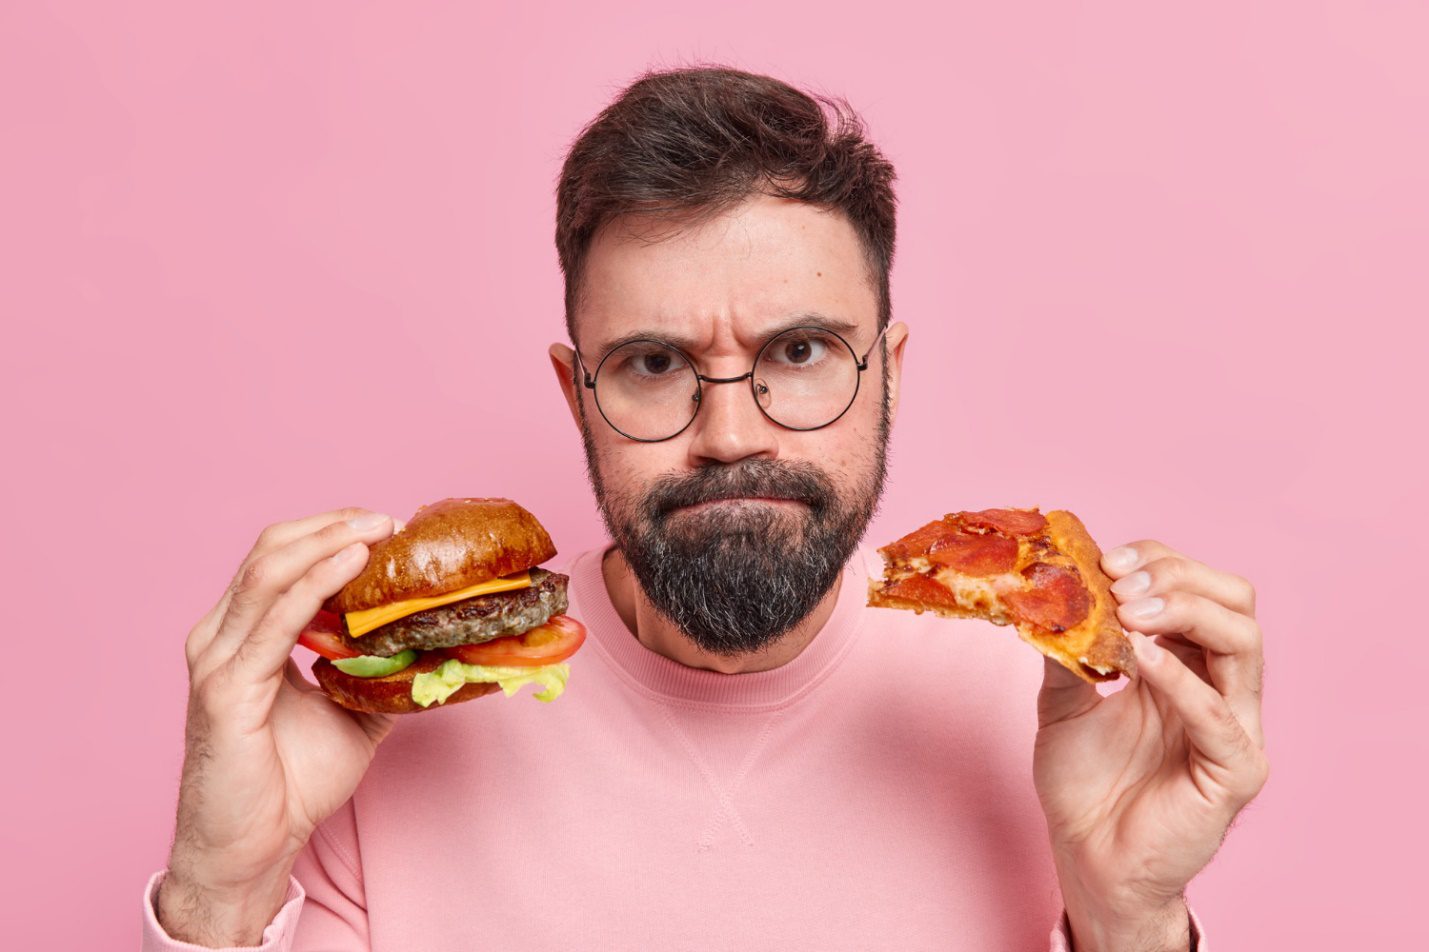 C:\Users\Dell\Downloads\man-holds-hamburger-pizza-presses-lips-wears-round-spectacles-jumper.jpg